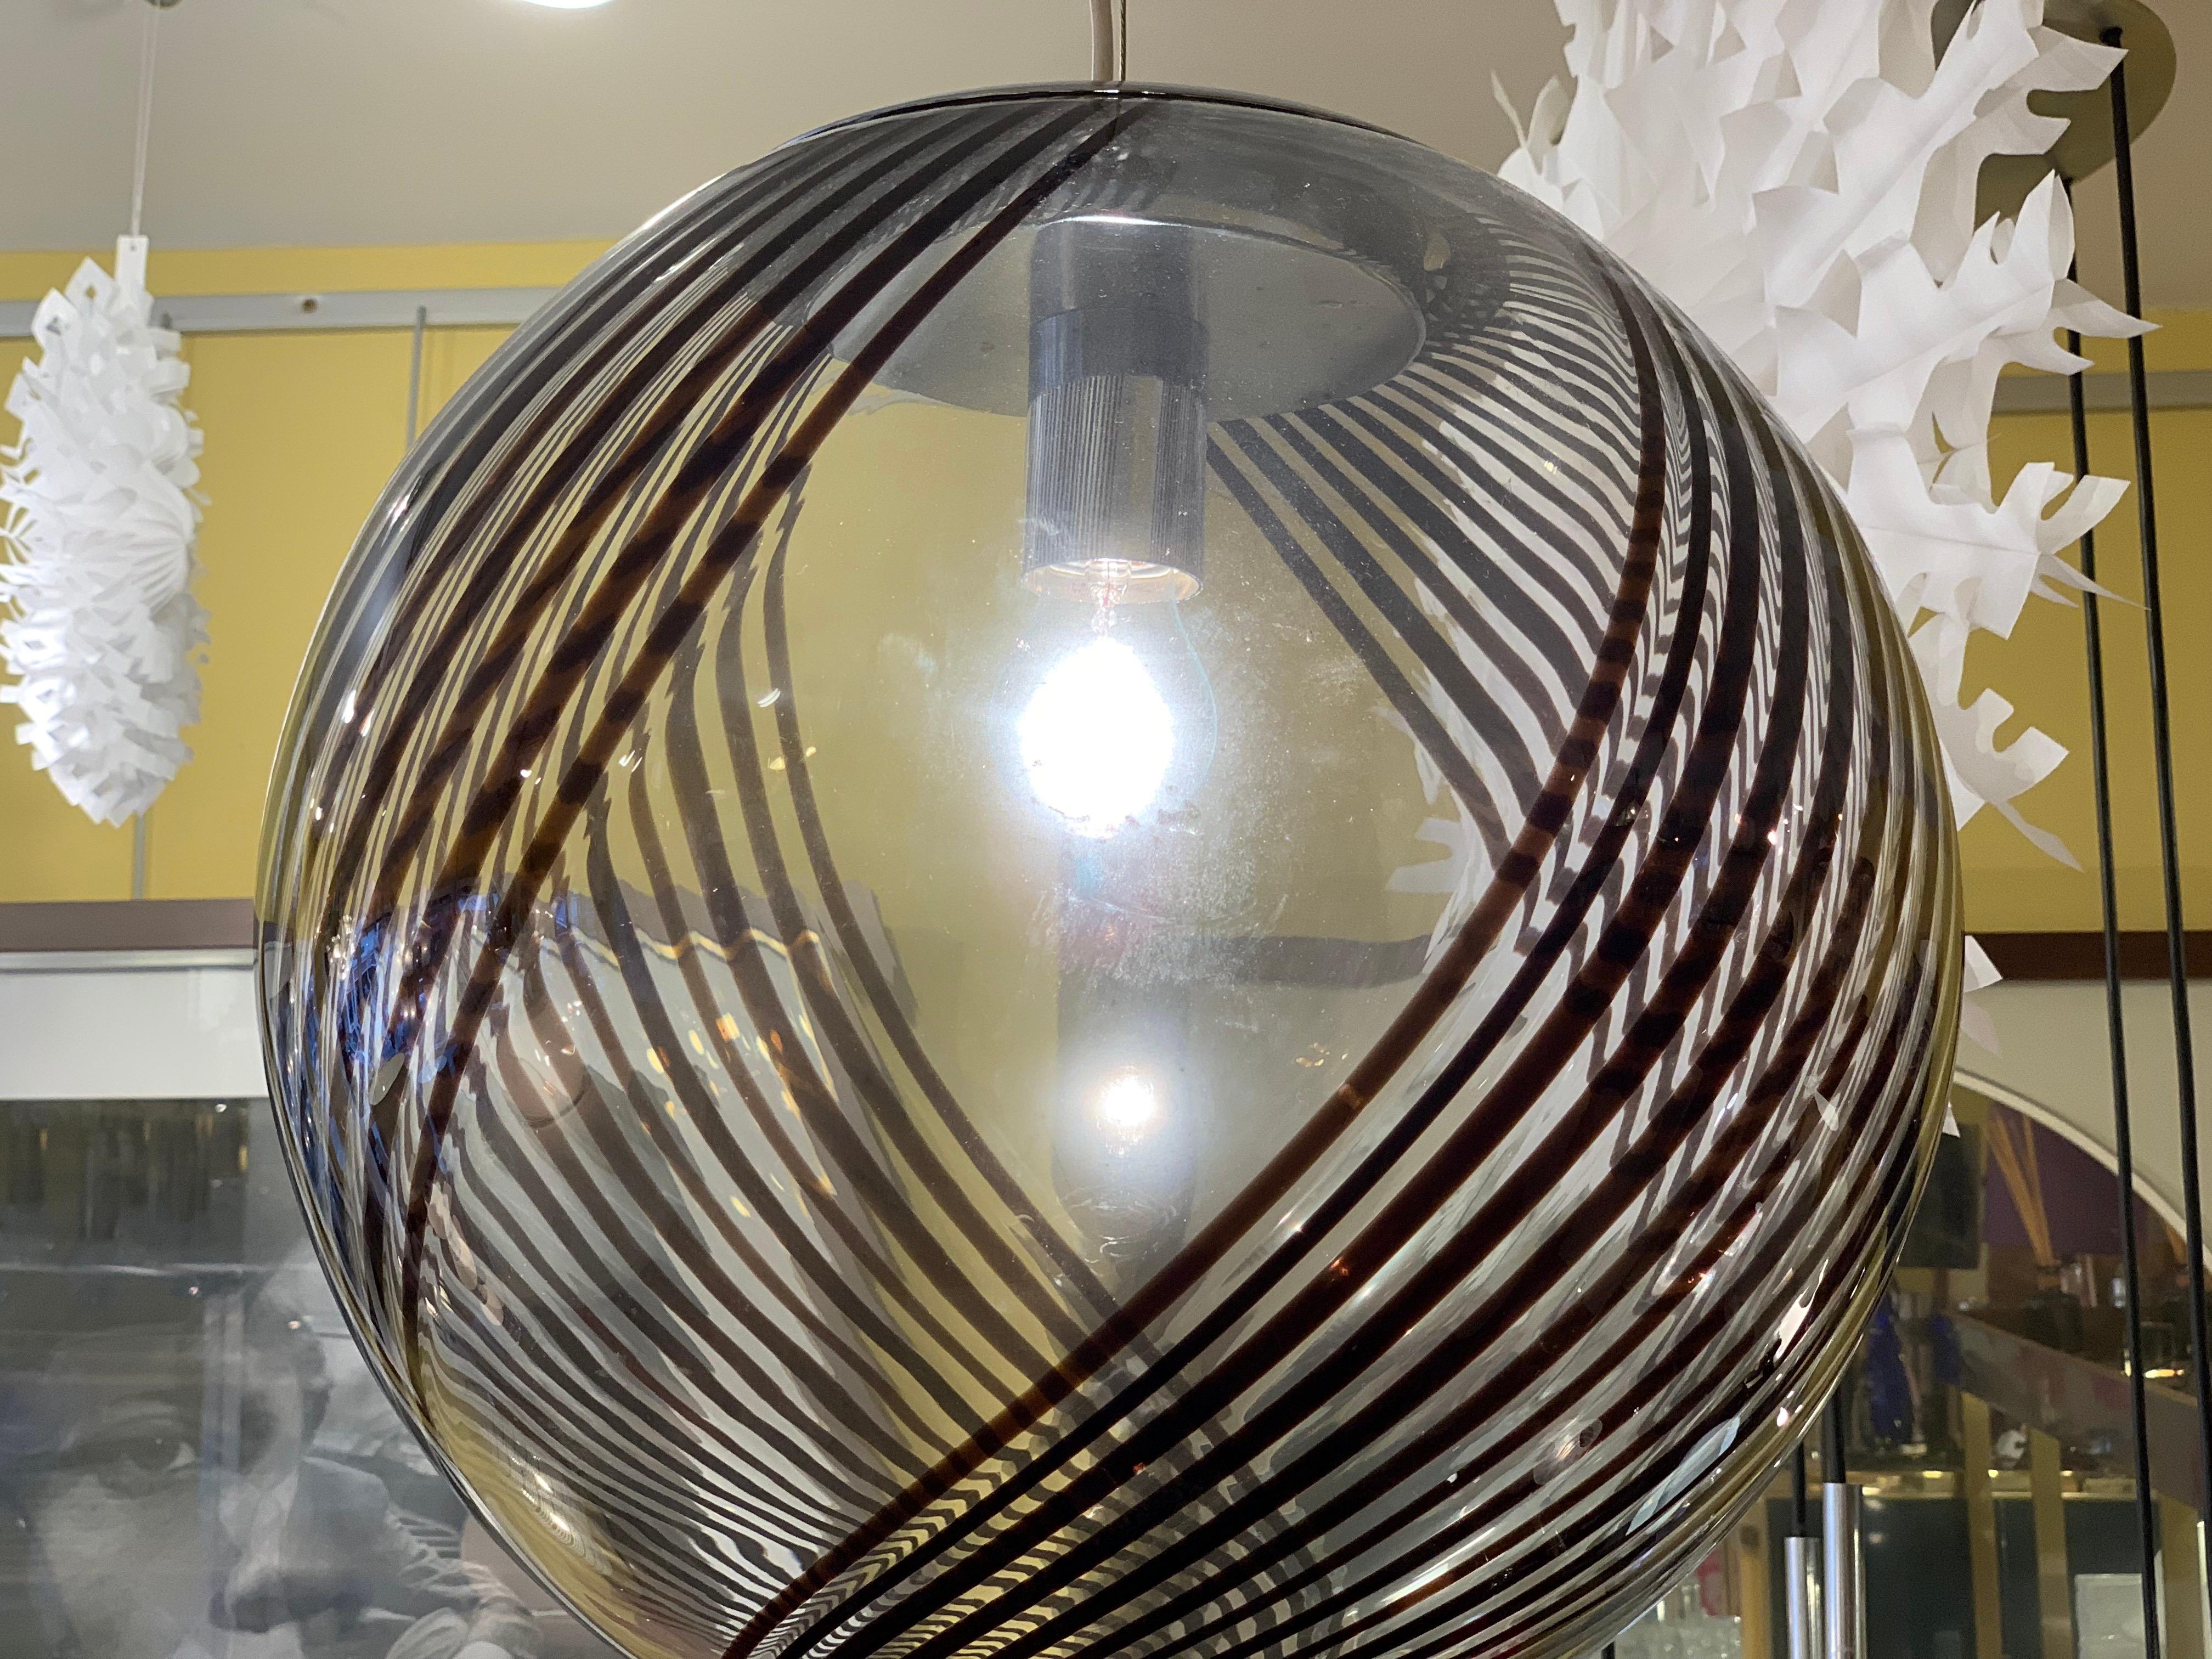 An Italian, Murano, 1970s, Venini style, beautiful, hand blown, glass globe pendant light. A stunning black swirled pattern runs over the surface of the clear glass globe. The lights hangs from its original chrome mount fitting. The pendant light is